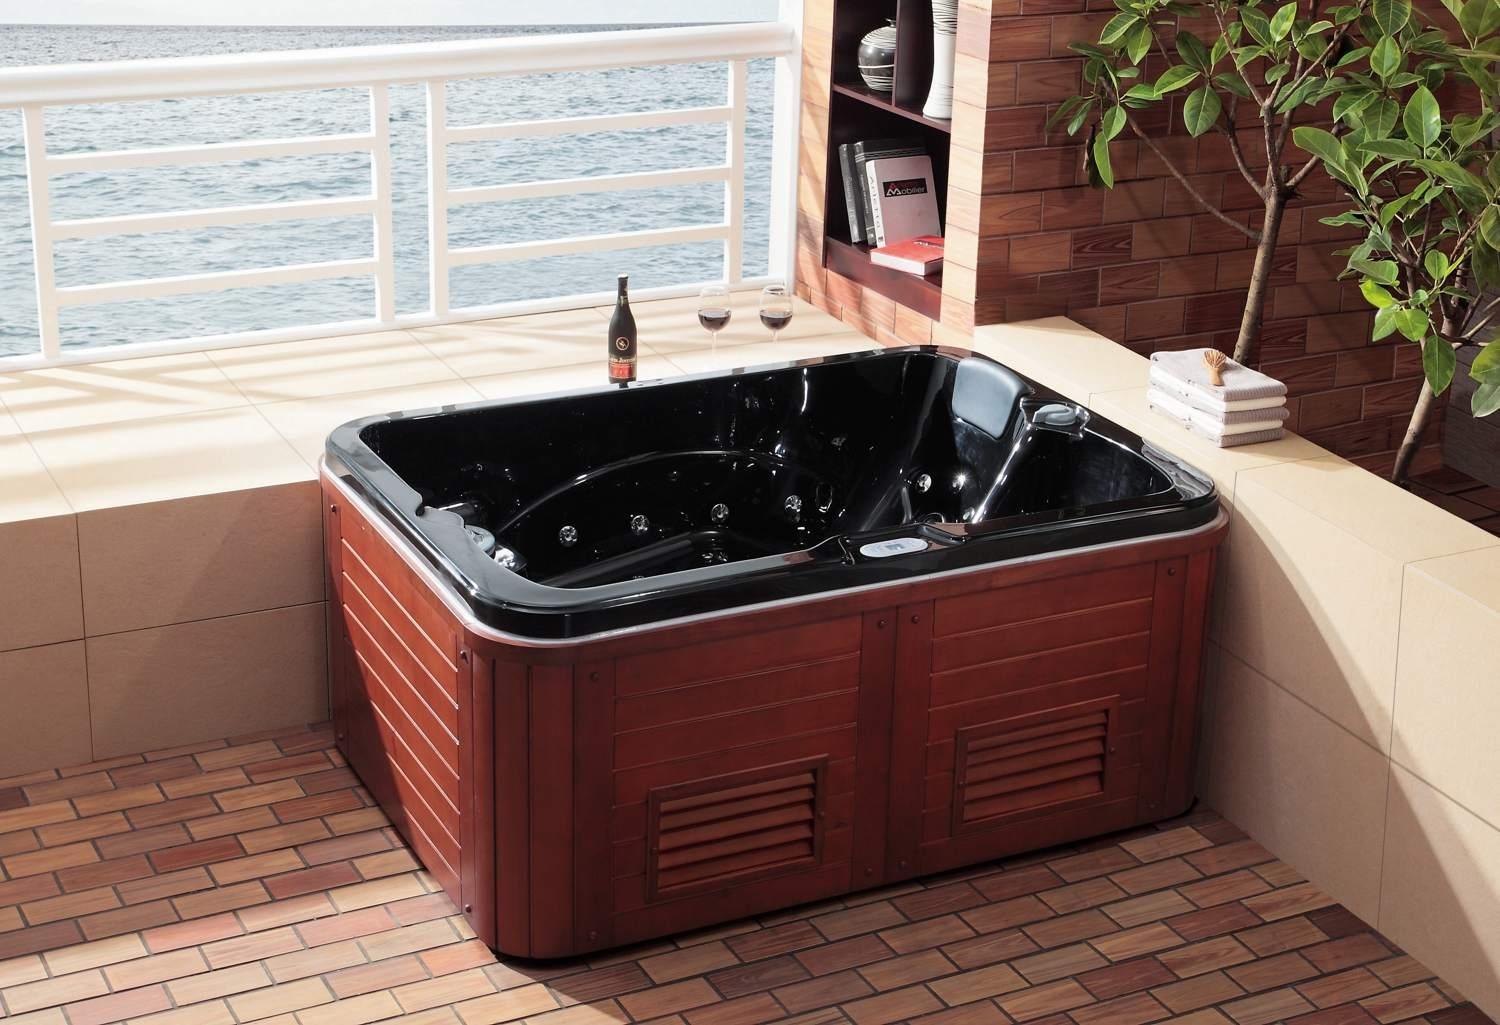 Spa jacuzzi exterior AS-007